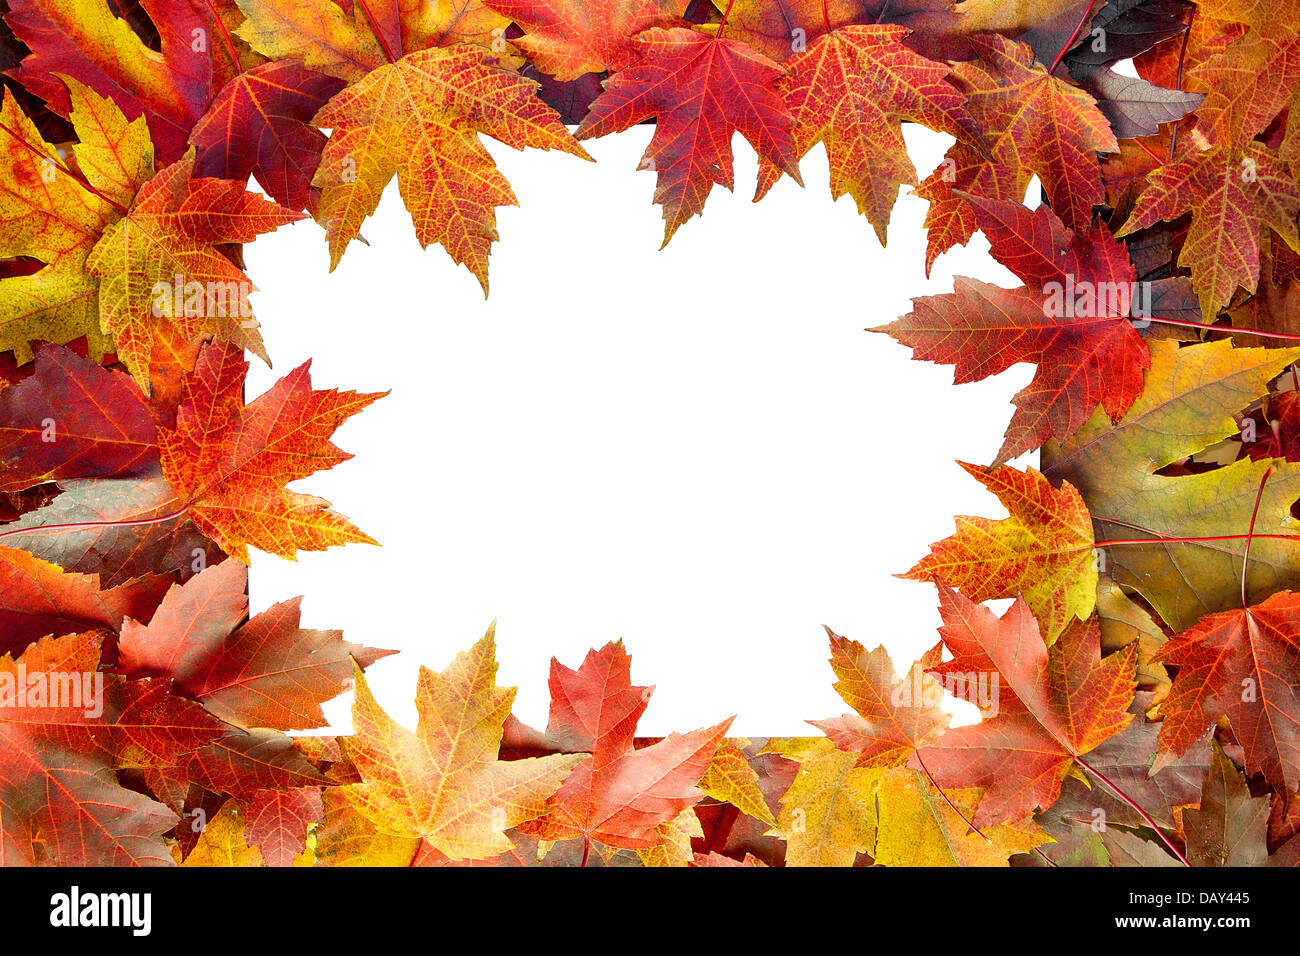 Colorful Autumn Maple Tree Fall Leaves Border with White Blank Center for Text Stock Photo